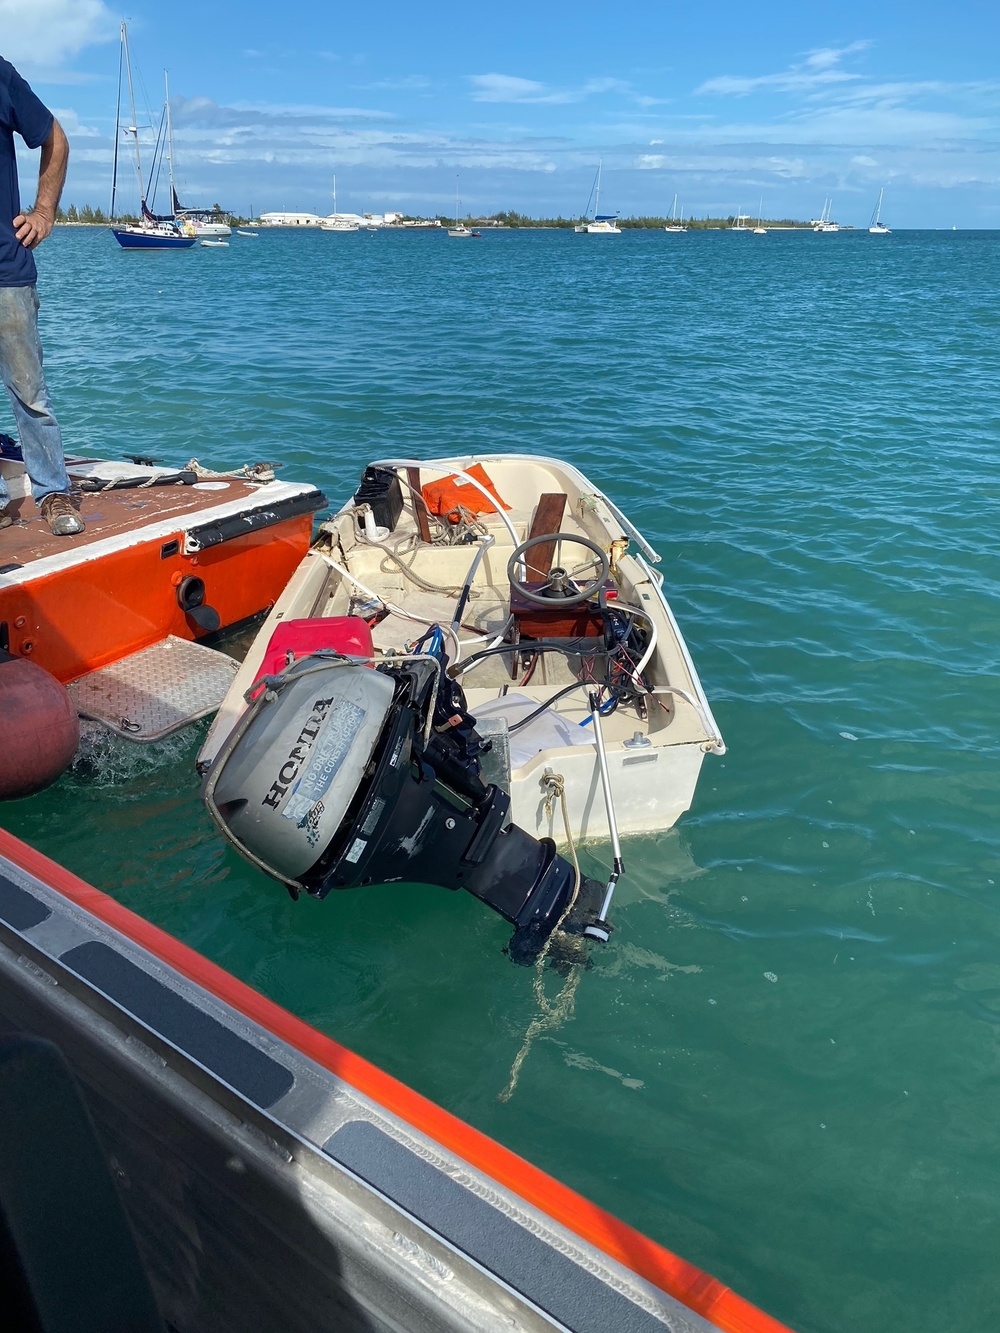 Coast Guard assisted 4 people after boat collision near Key west